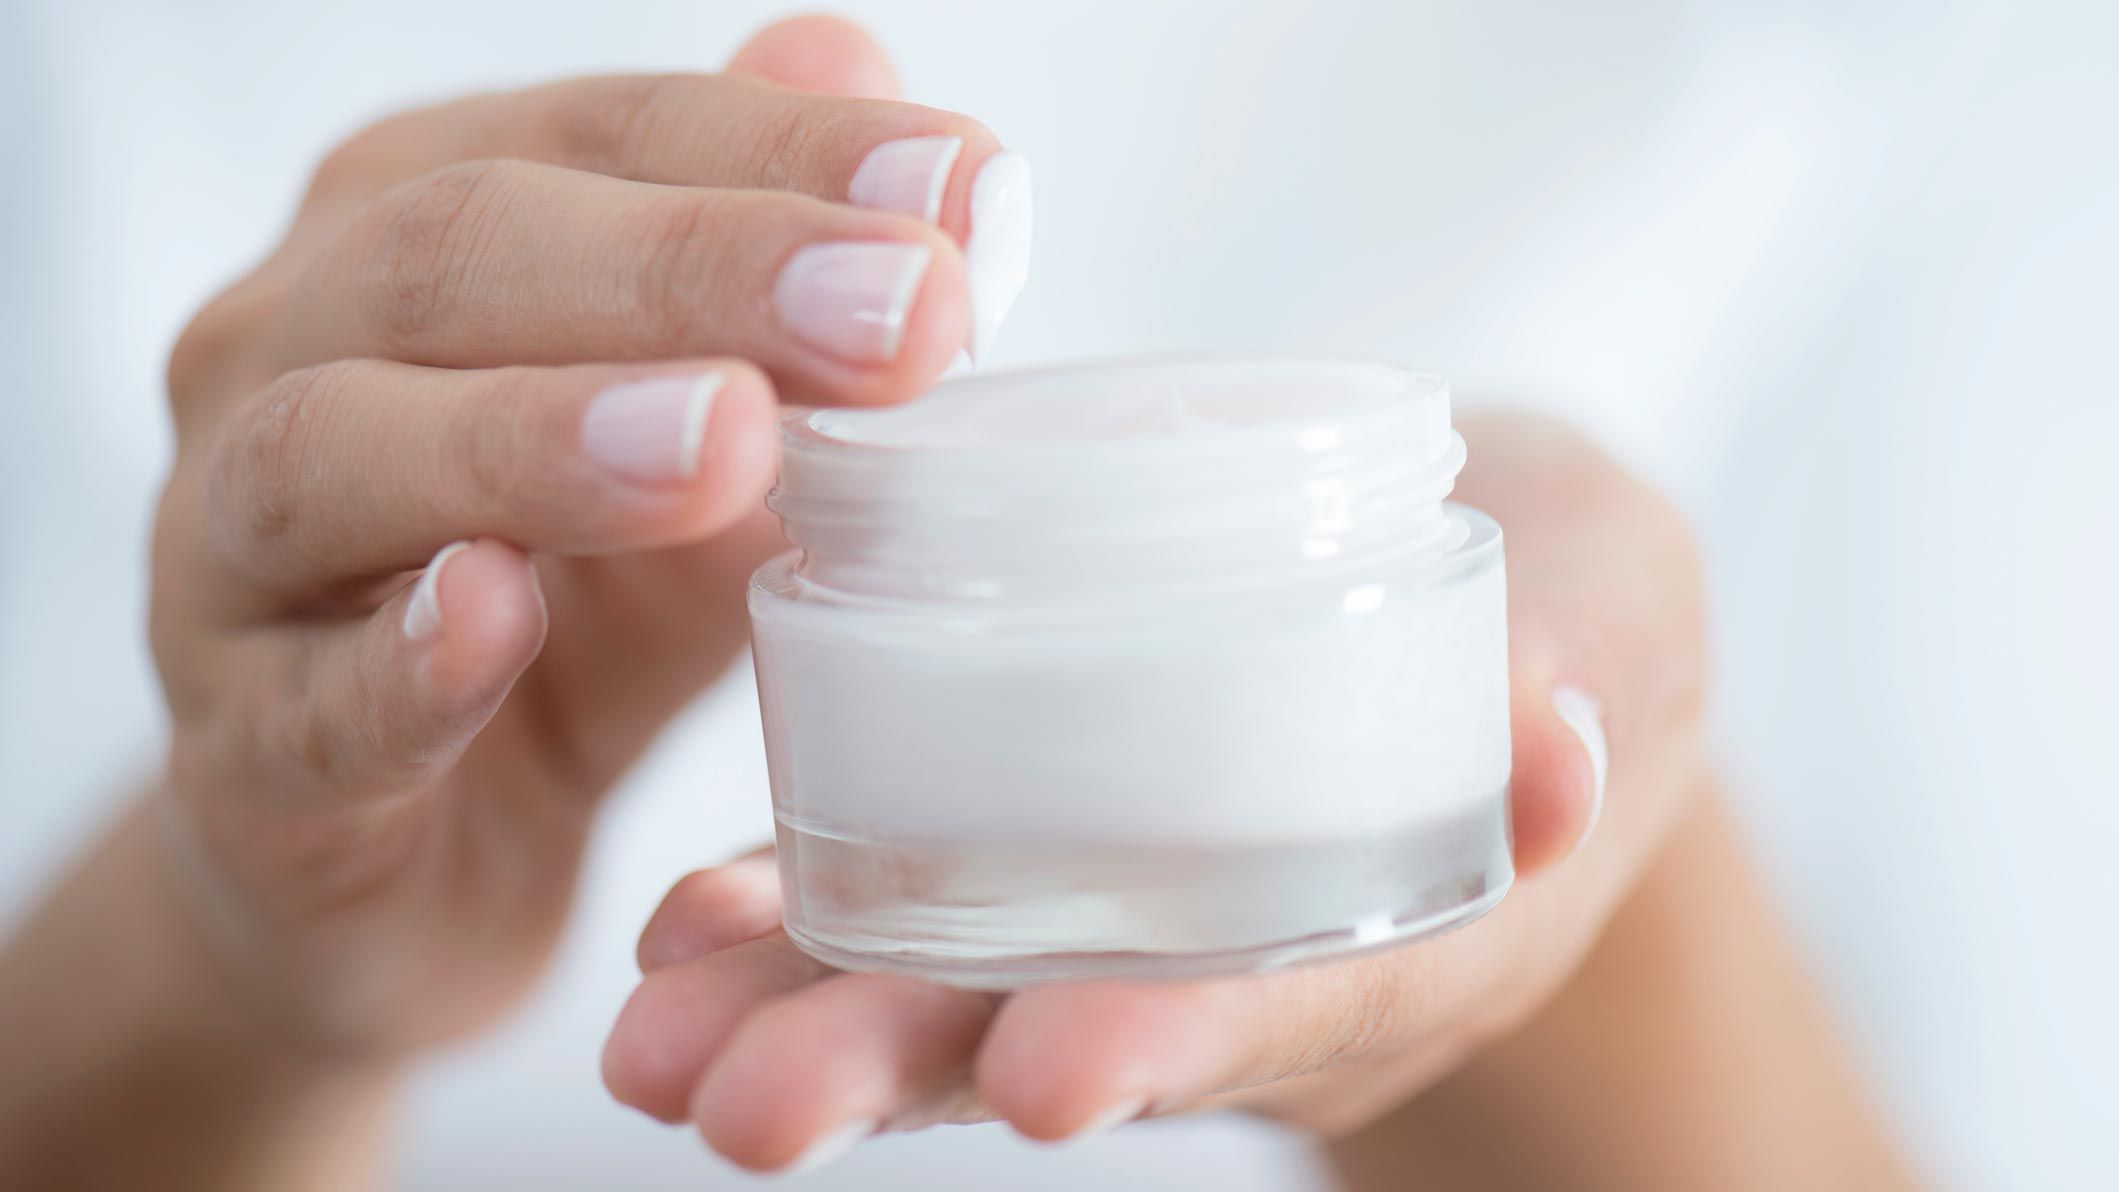 The most gifted anti-aging cream of the moment